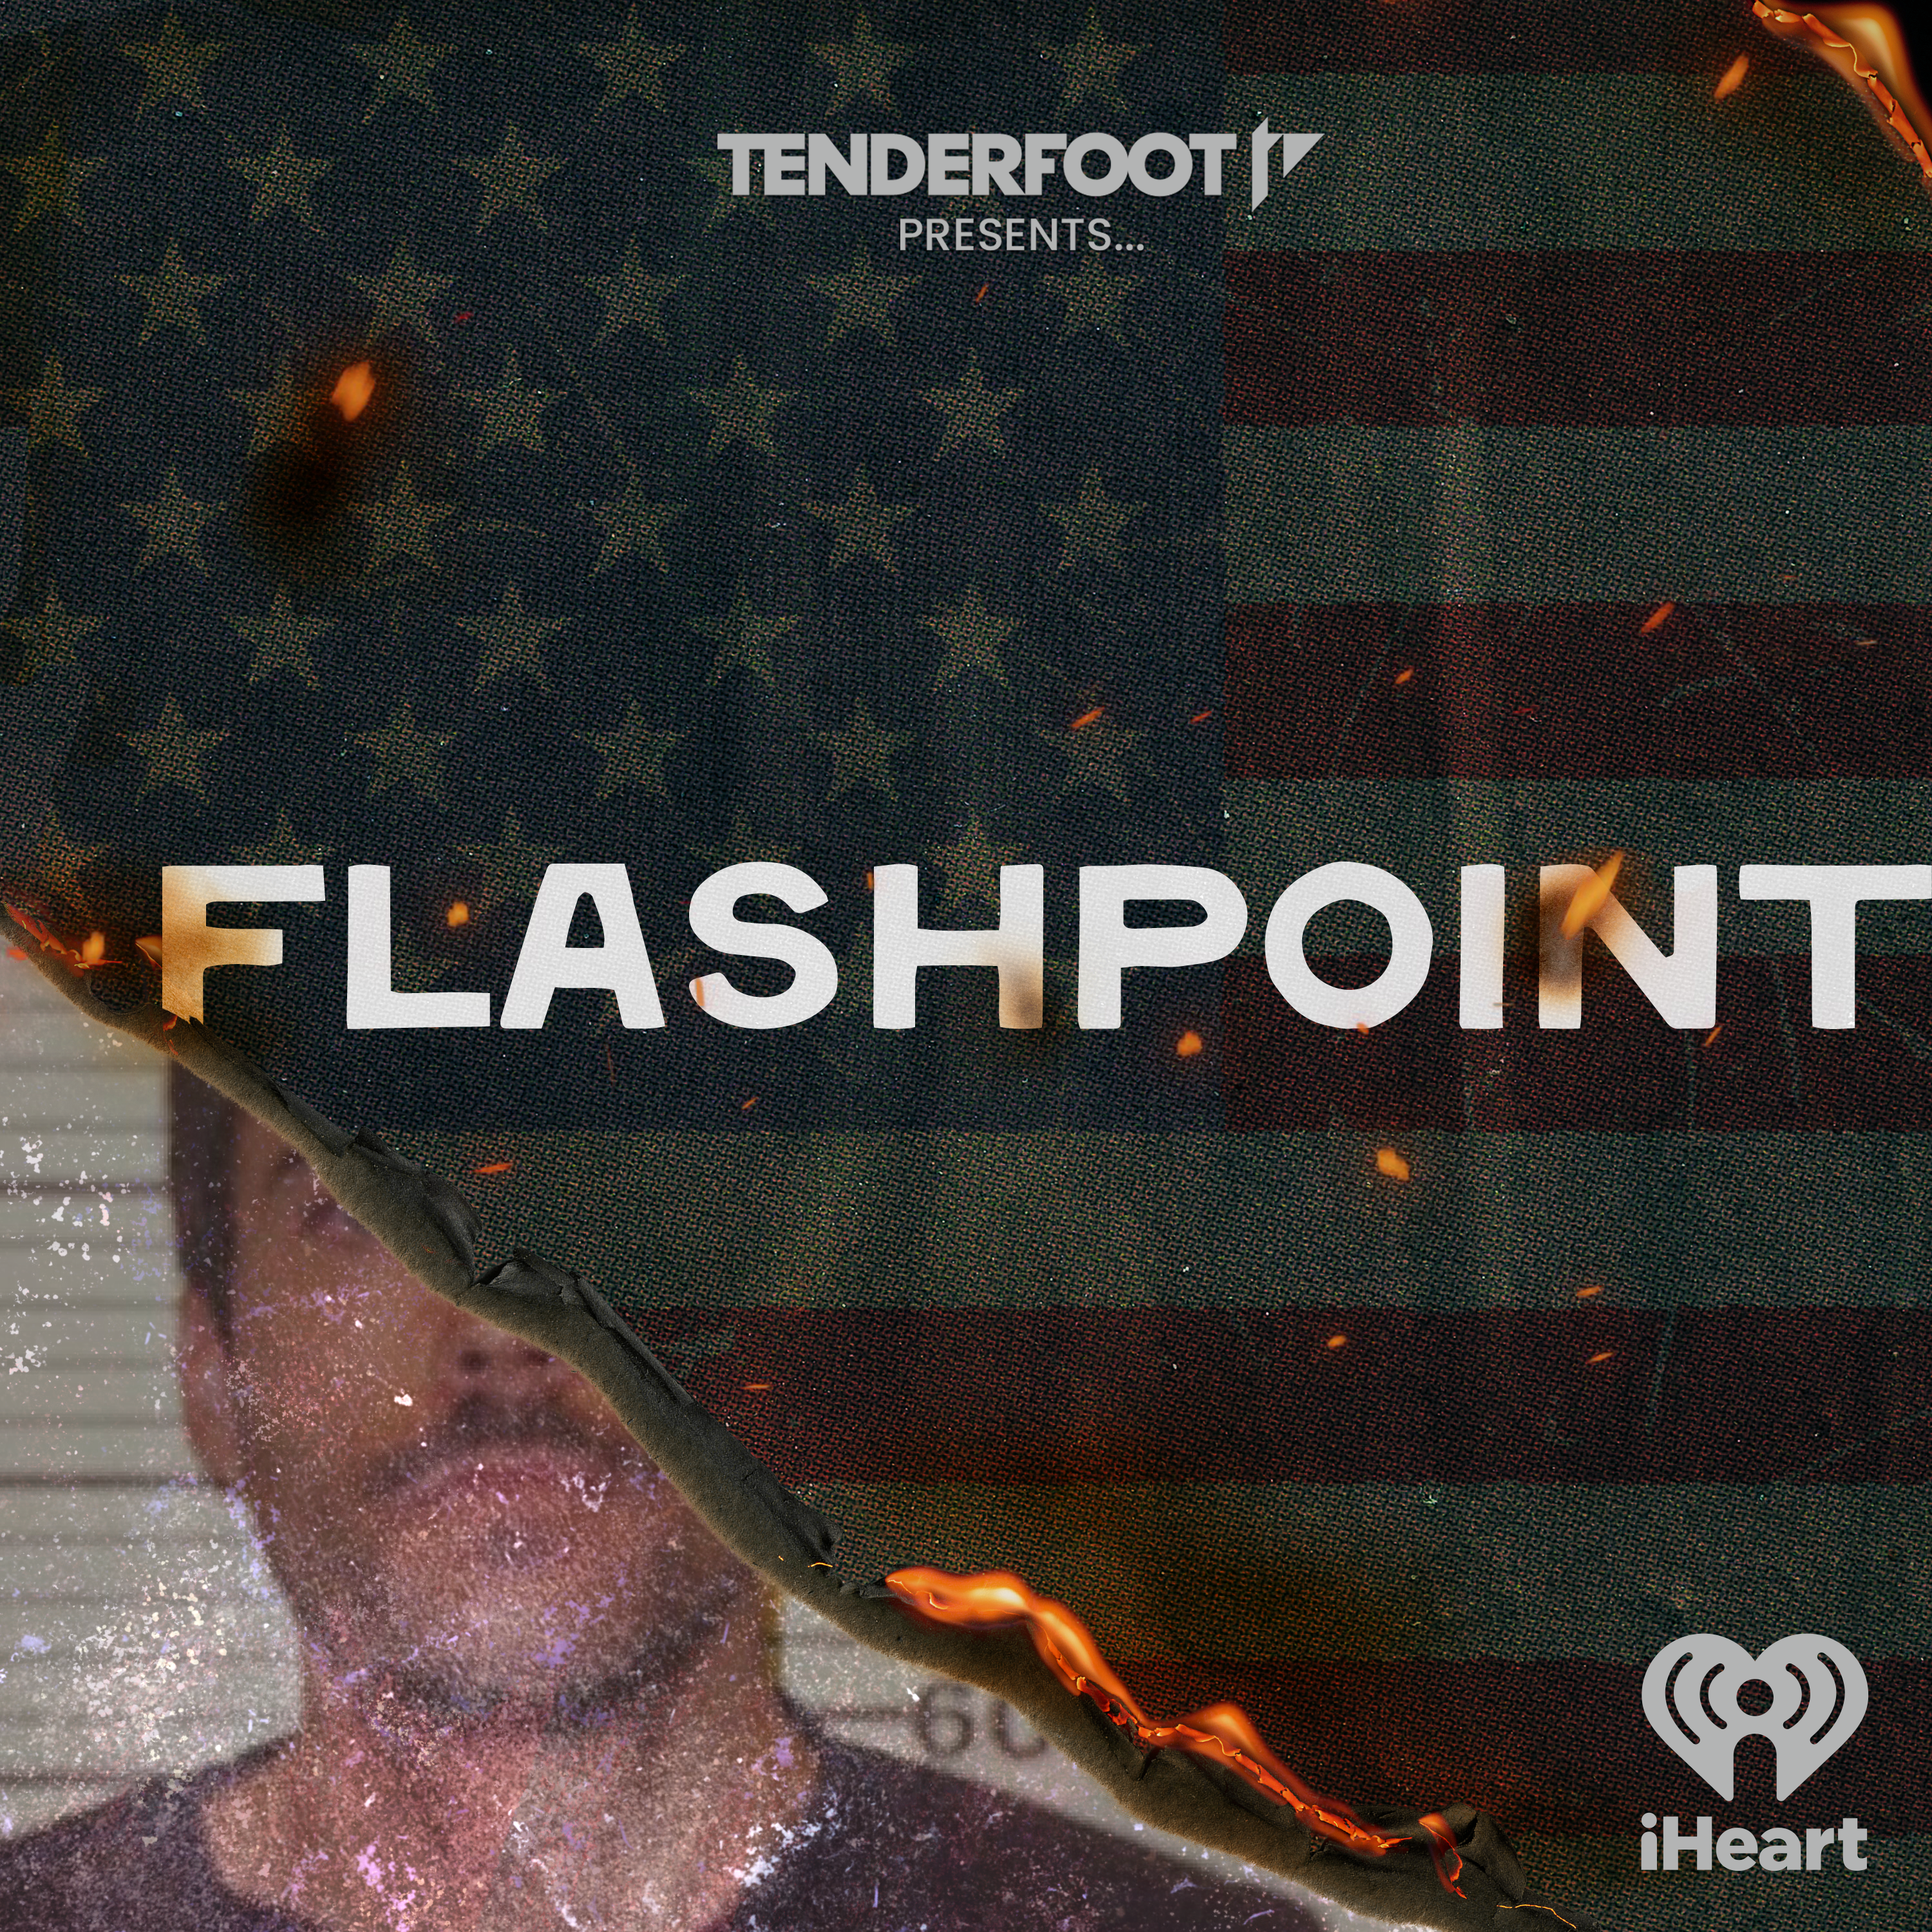 Introducing Flashpoint